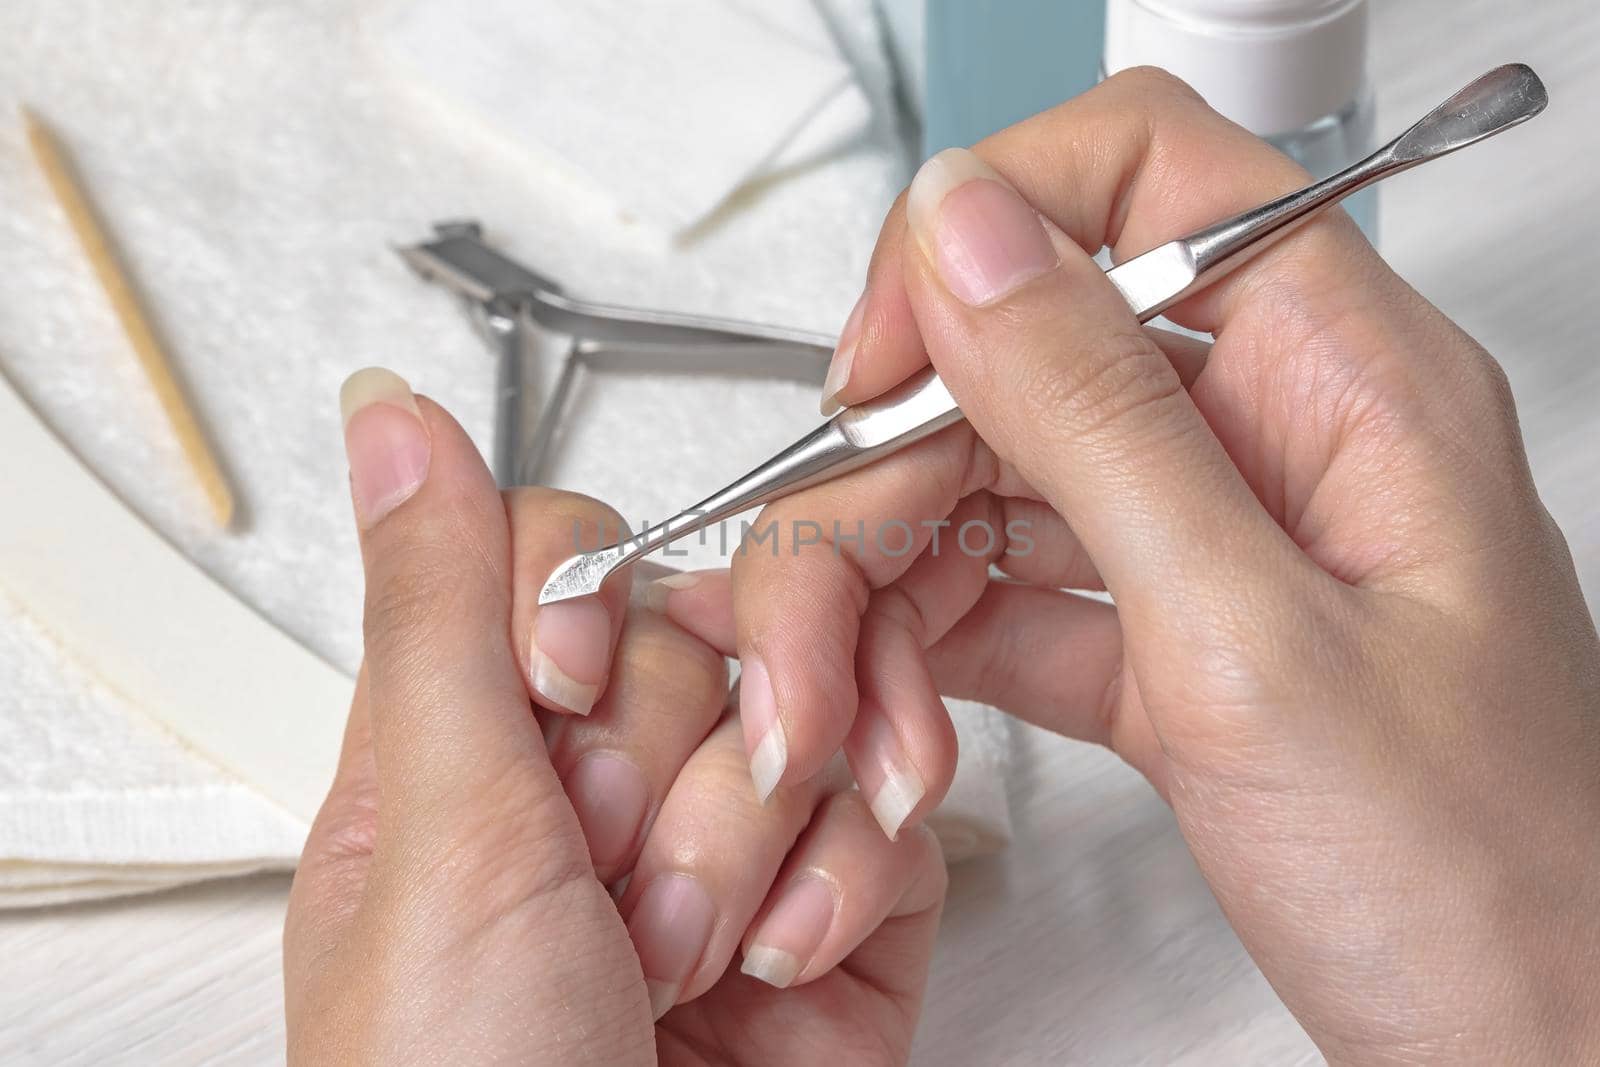 Manicure.Push back the cuticle with a metal pusher.Getting injured during manicure. Skin care,hands,nails,hygiene.Spa salon, nail salon.Home care. Beauty.Women's hands by YevgeniySam